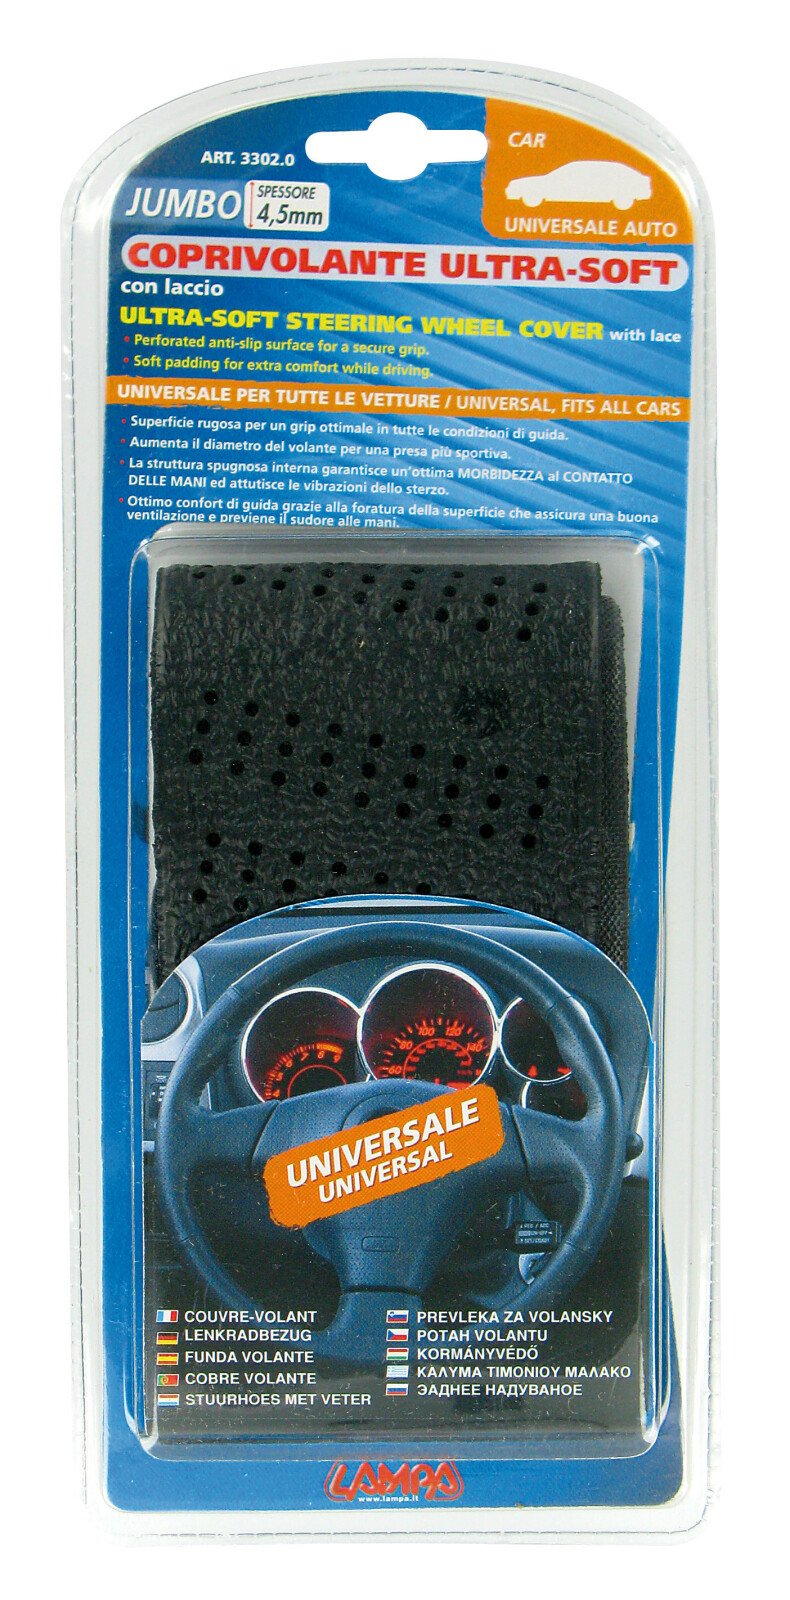 Jumbo-Car, steering wheel cover with lace - Universal thumb